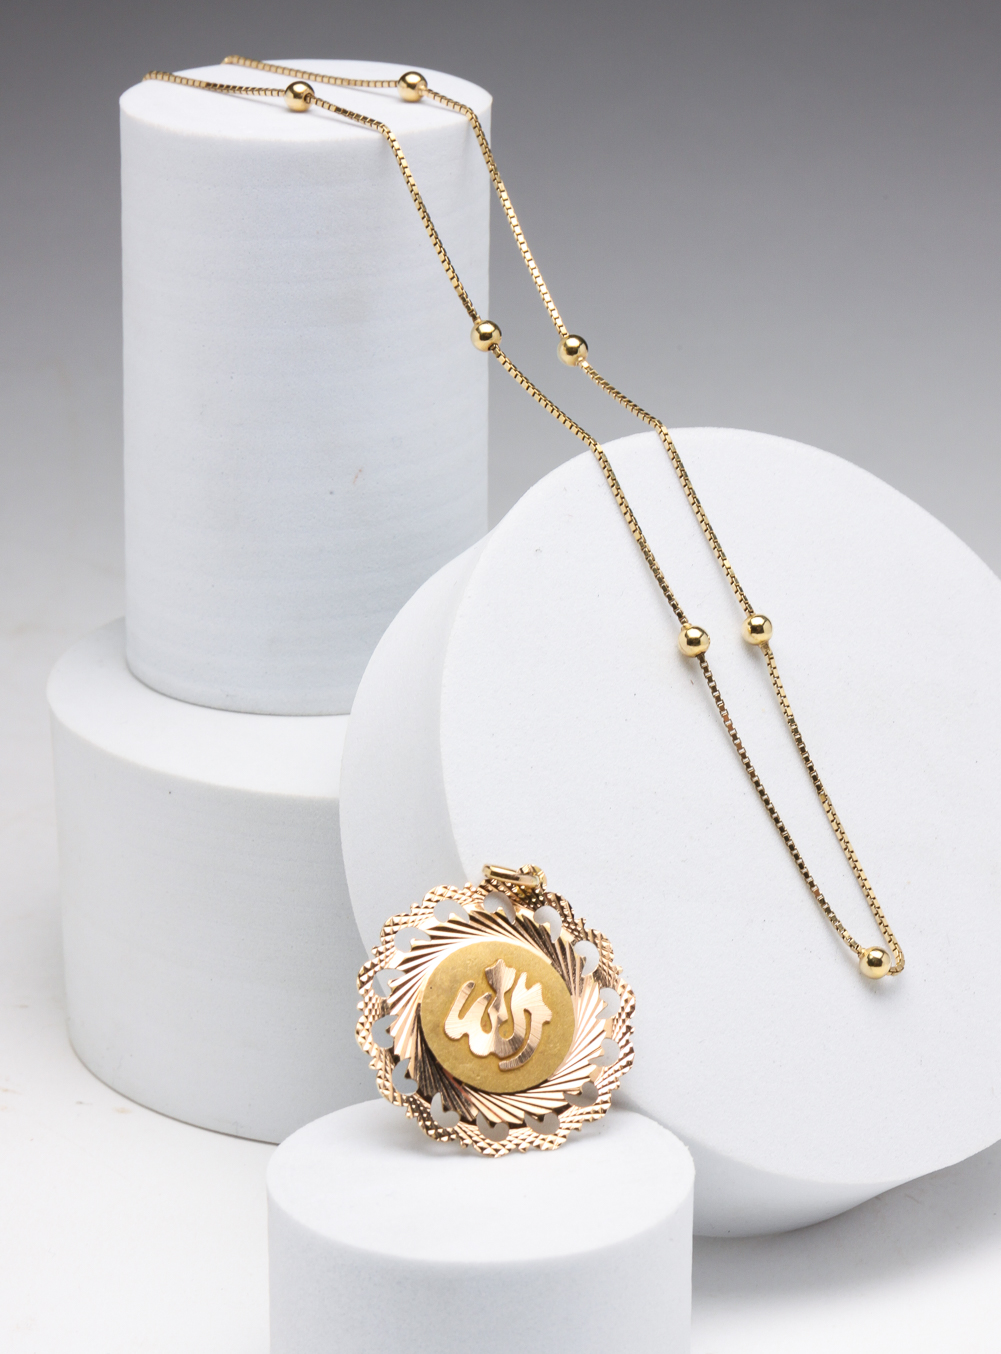 18K GOLD CHAIN AND PENDANT/CHARM.